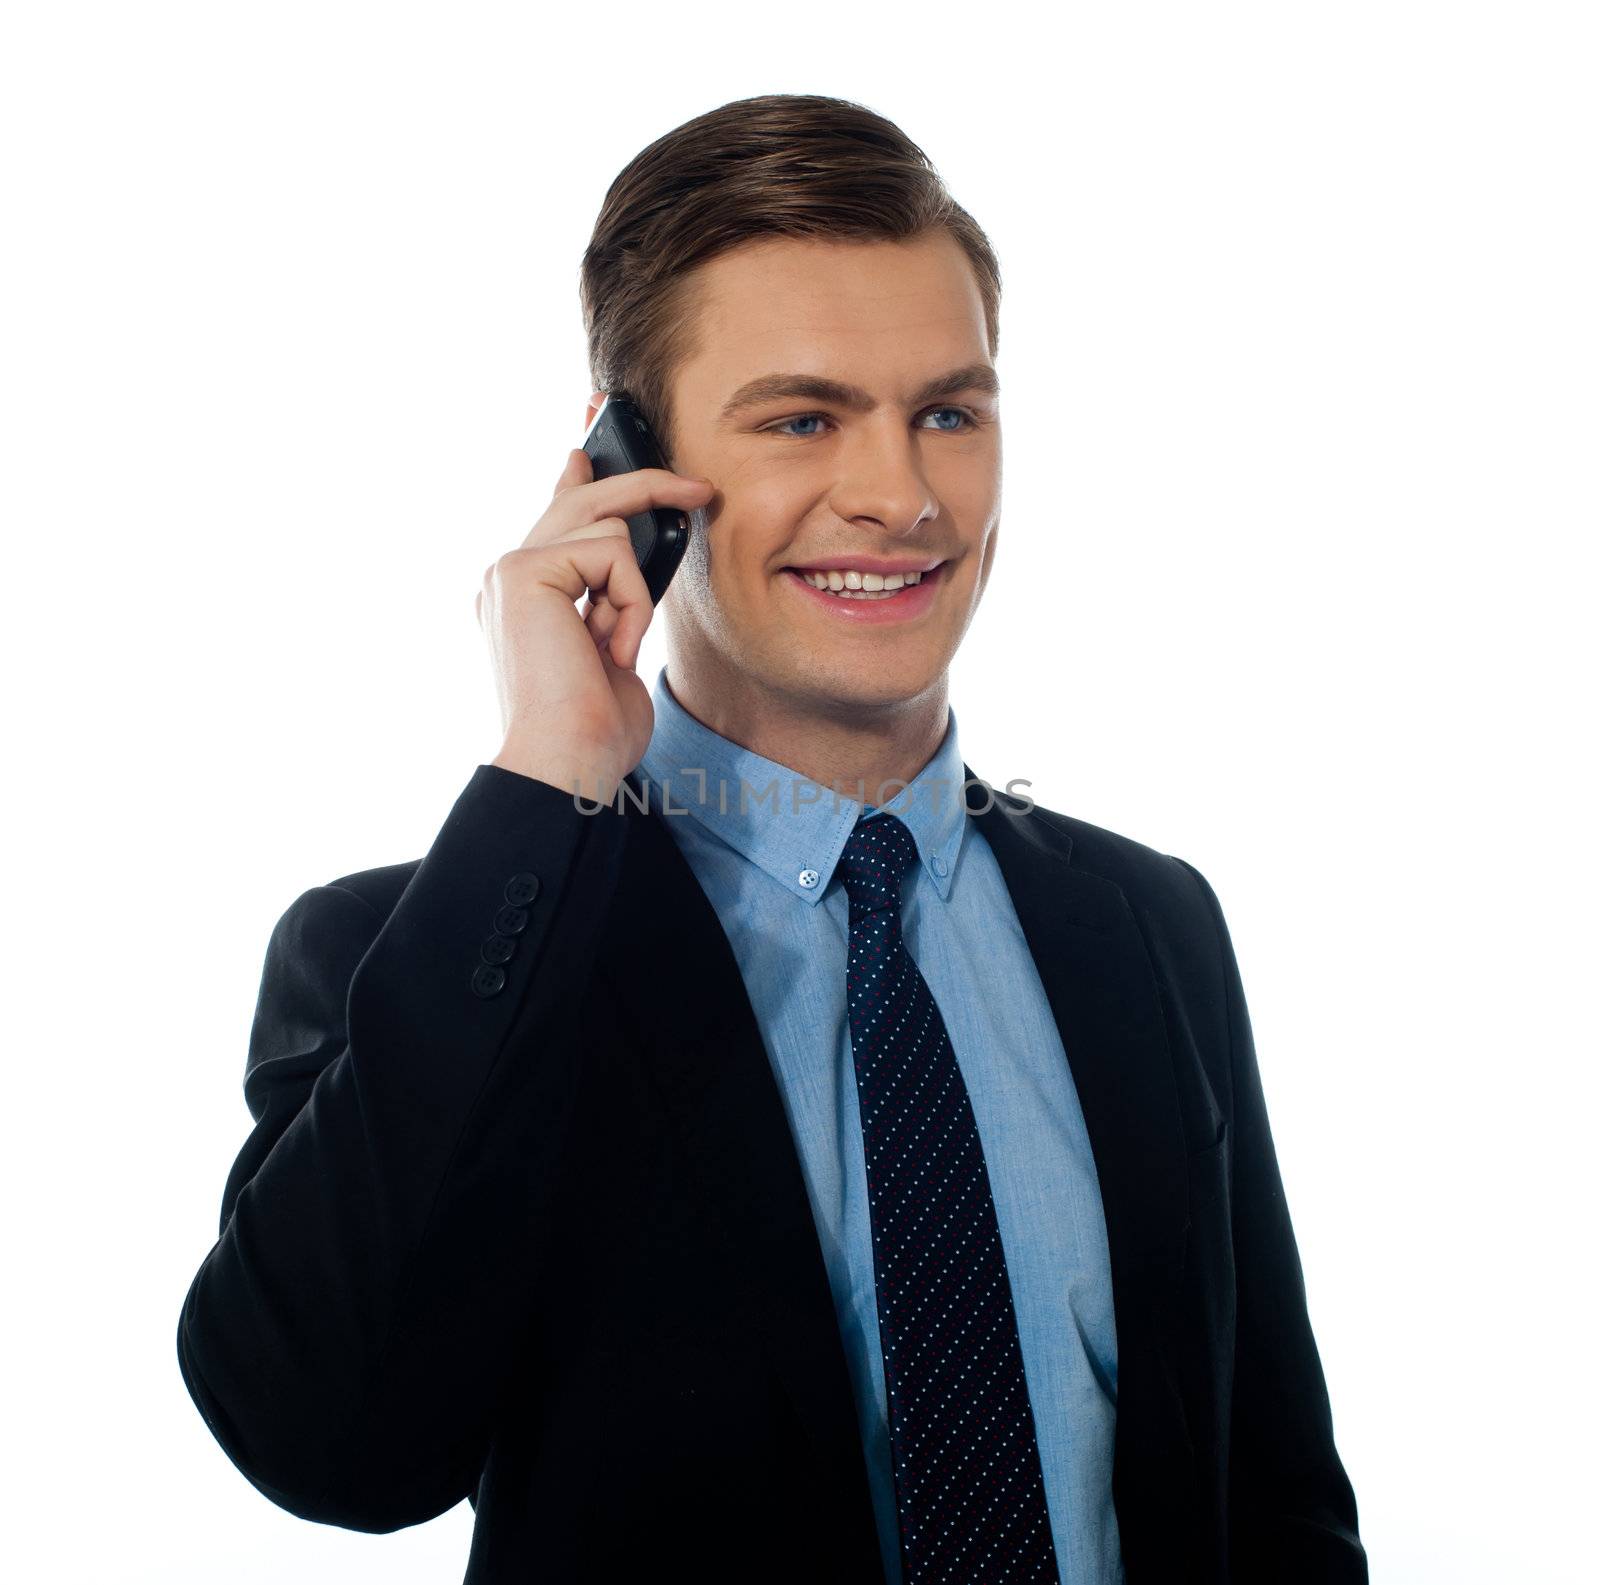 Corporate young man communicating via cell phone at work